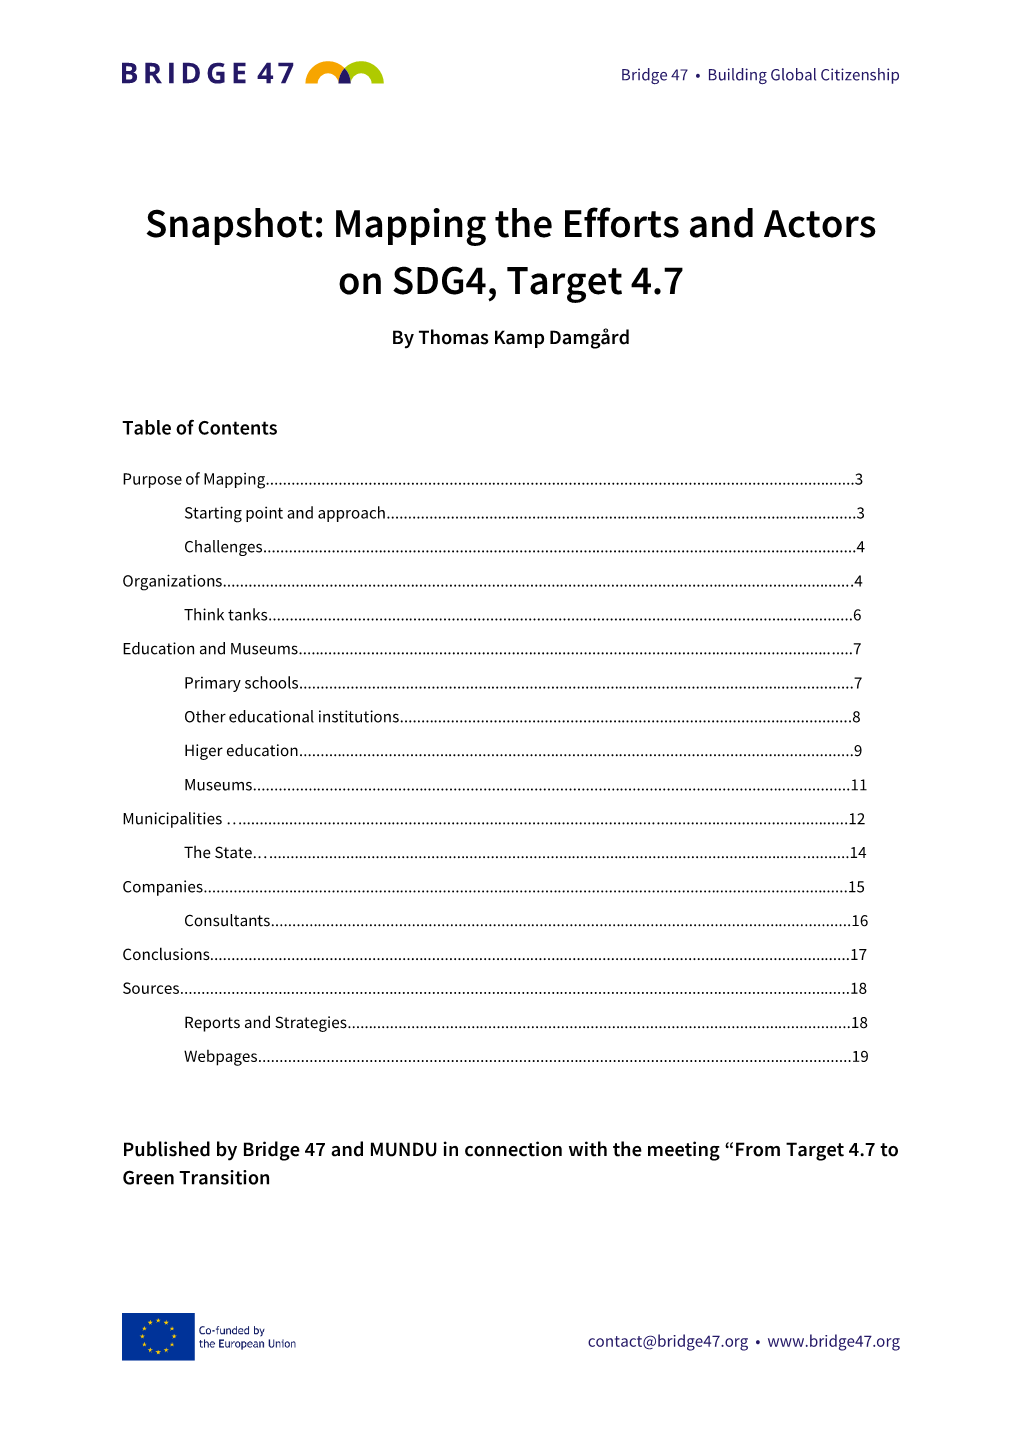 Snapshot: Mapping the Efforts and Actors on SDG4, Target 4.7 by Thomas Kamp Damgård